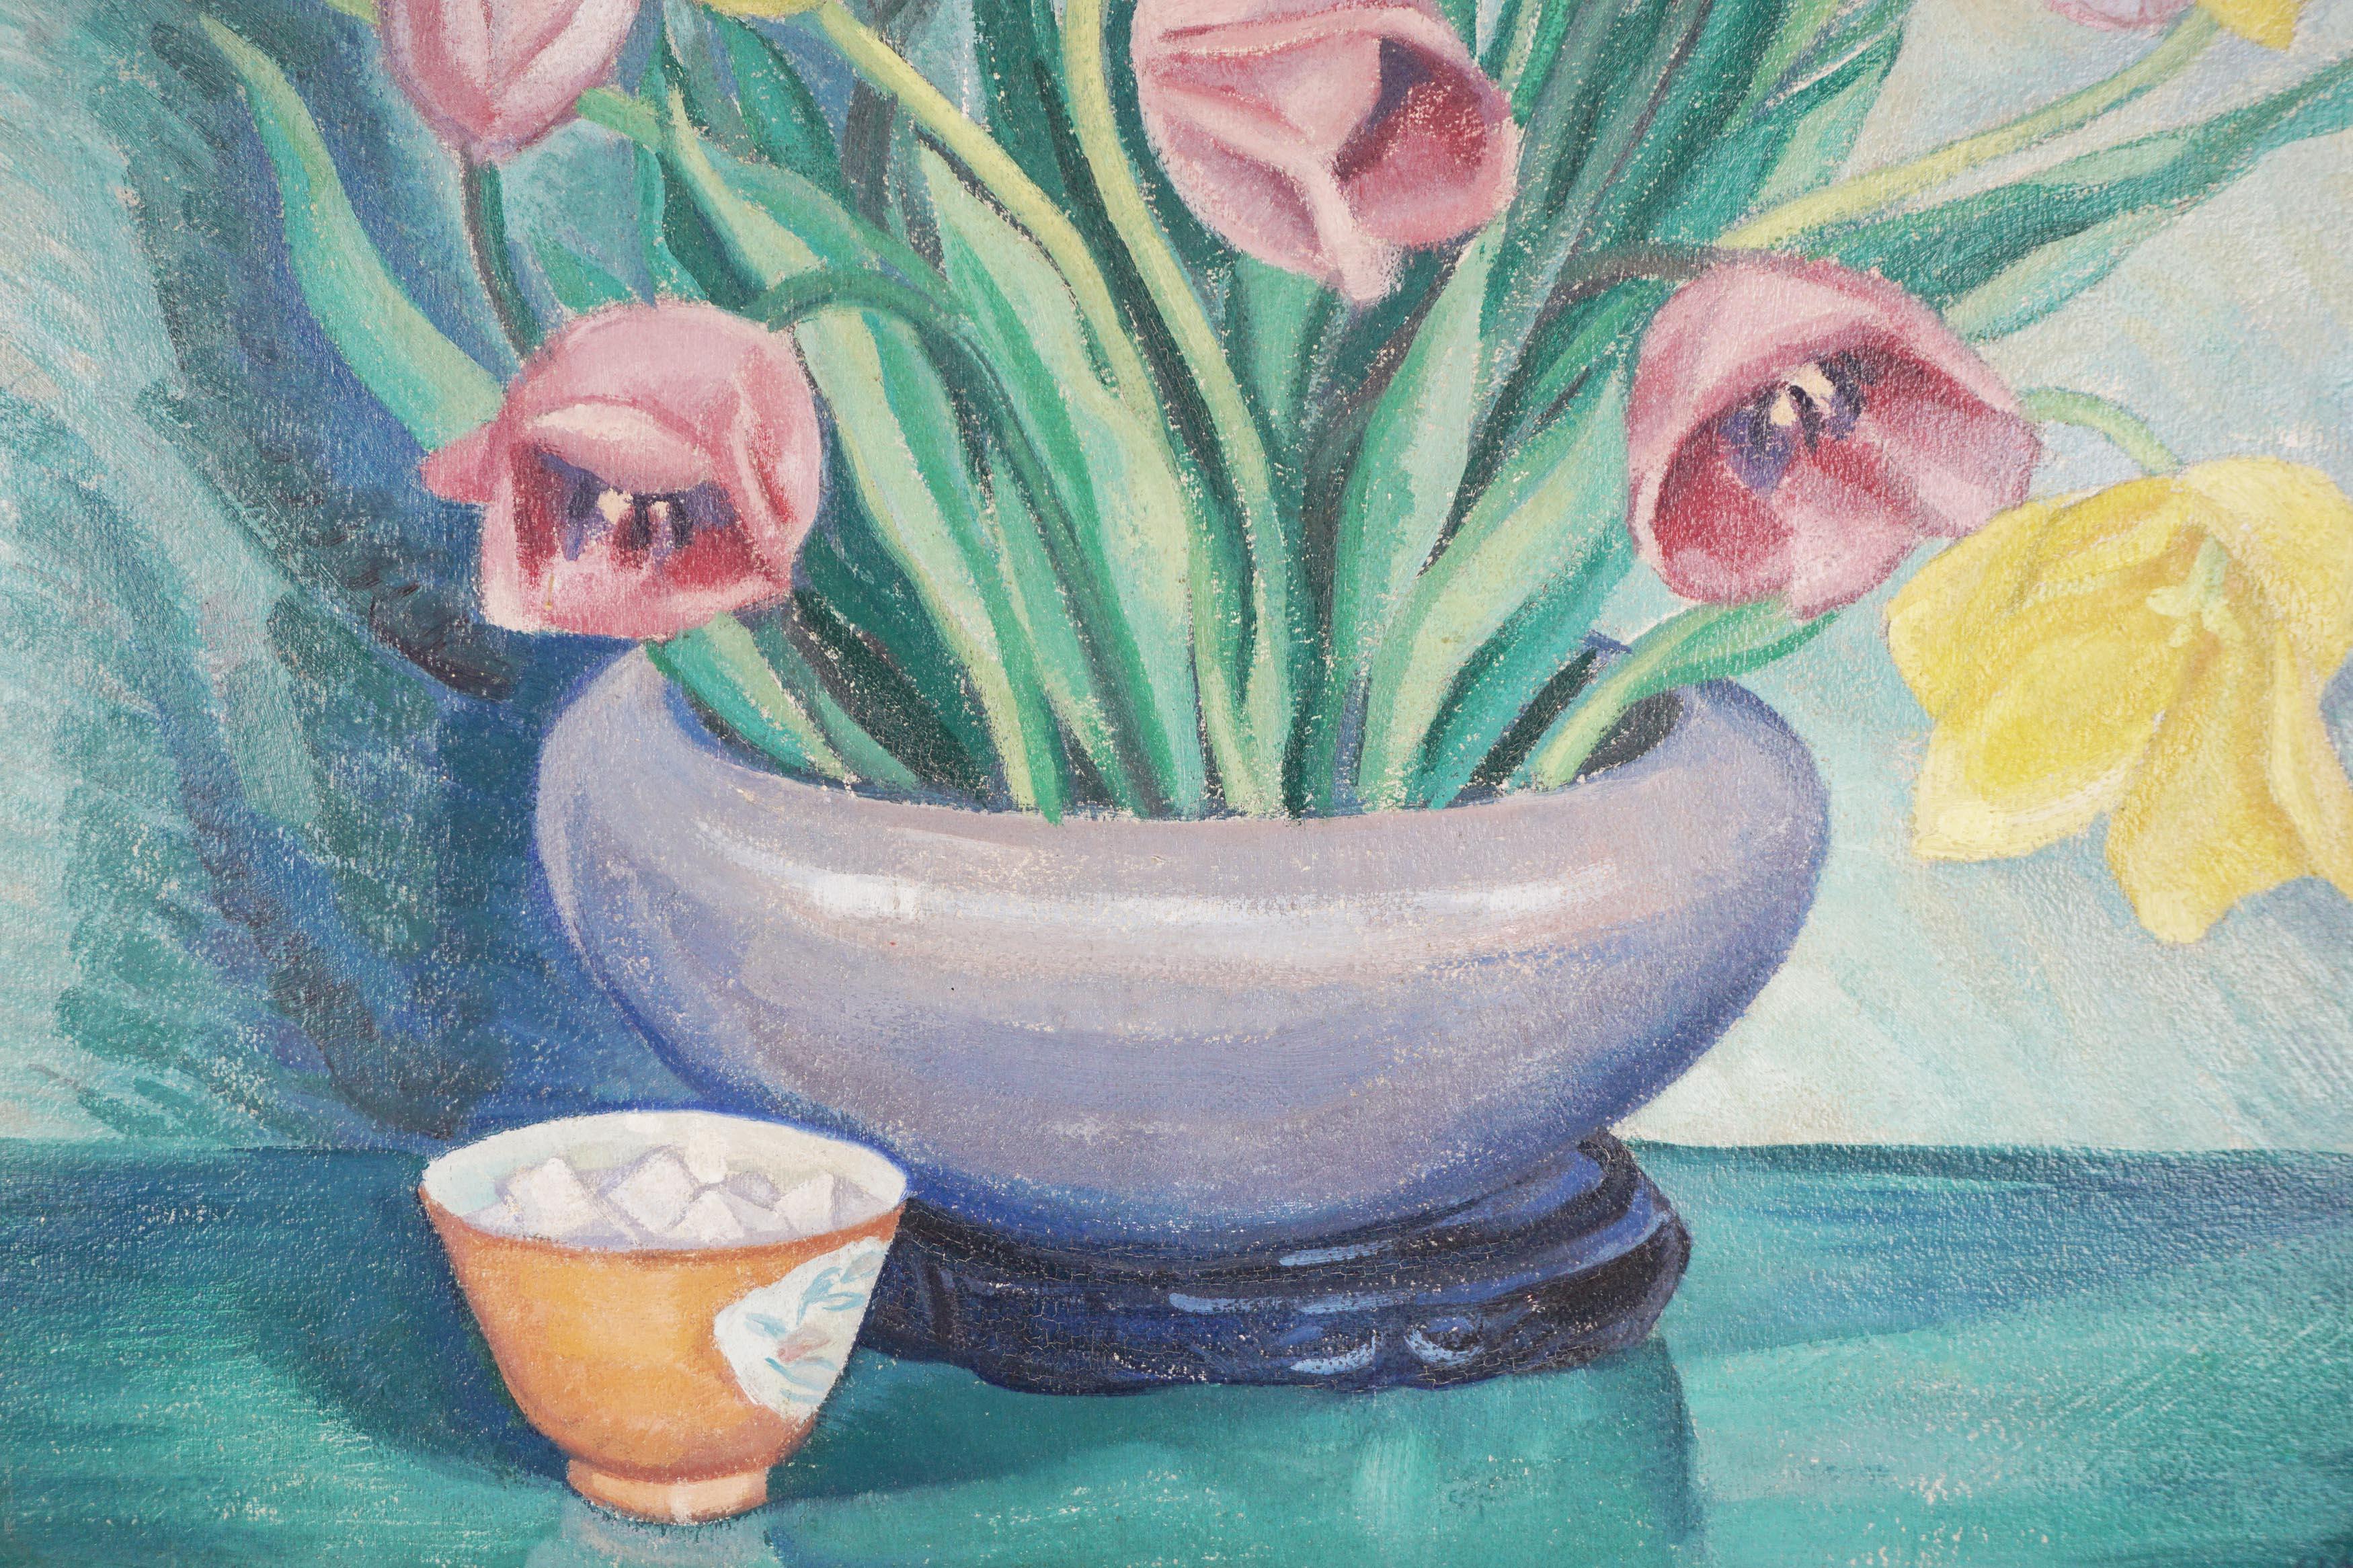 Wonderful art deco style still life of yellow and lavender tulips in vase with sugar bowl by Hamlin (American, 20th Century), circa 1935. Signed lower right 